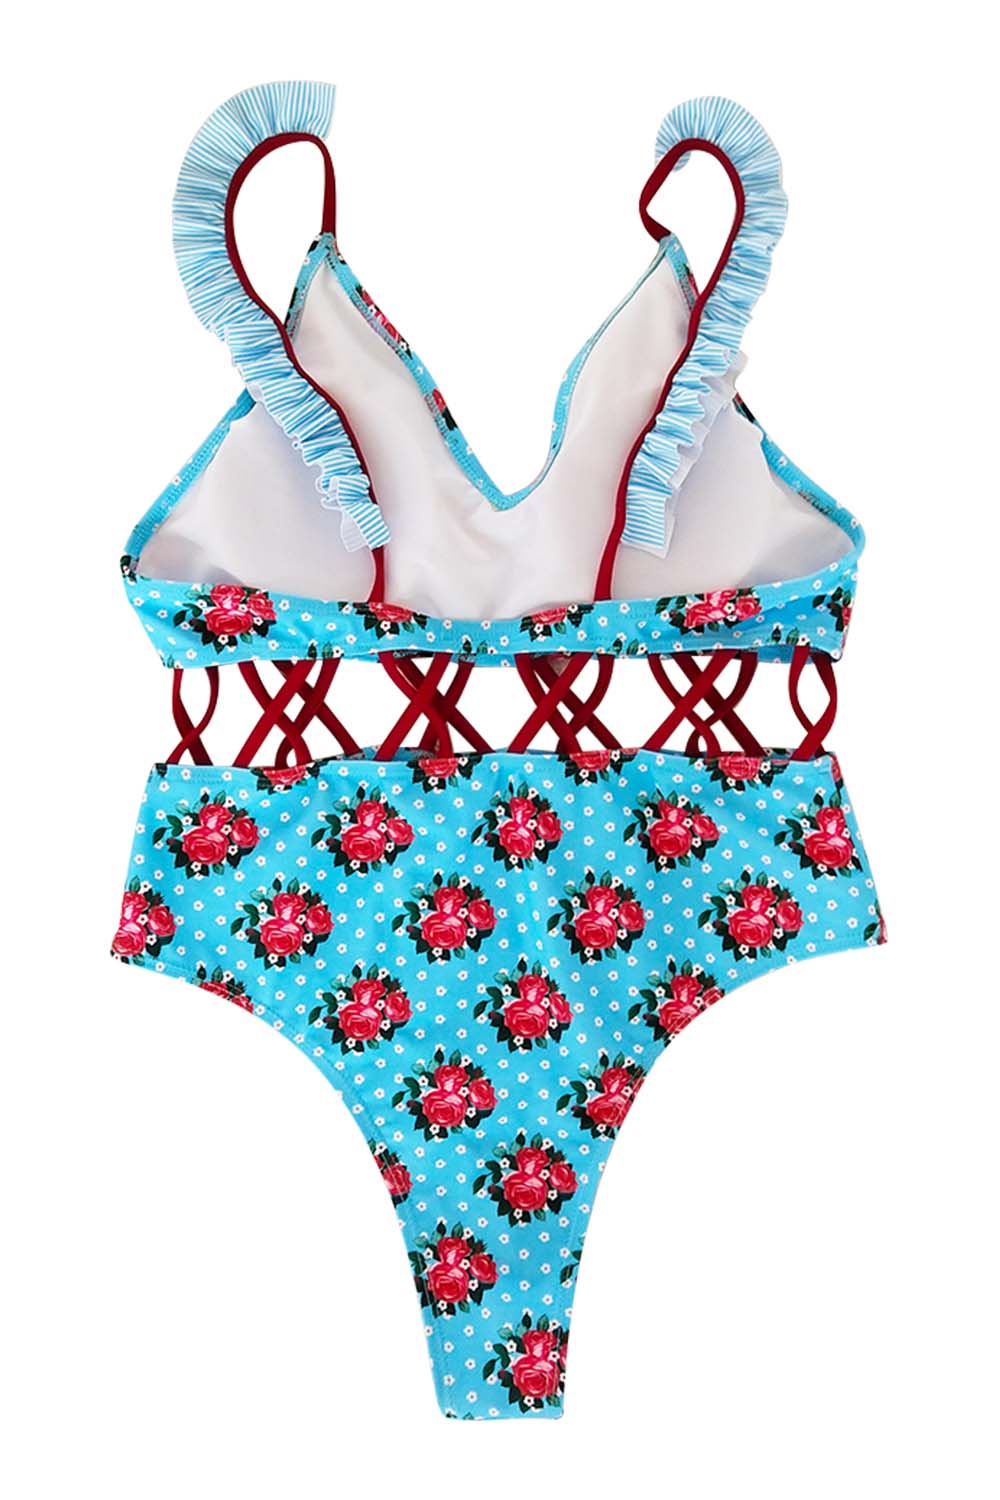 Iyasson Floral Criss Cross One-piece Swimsuit